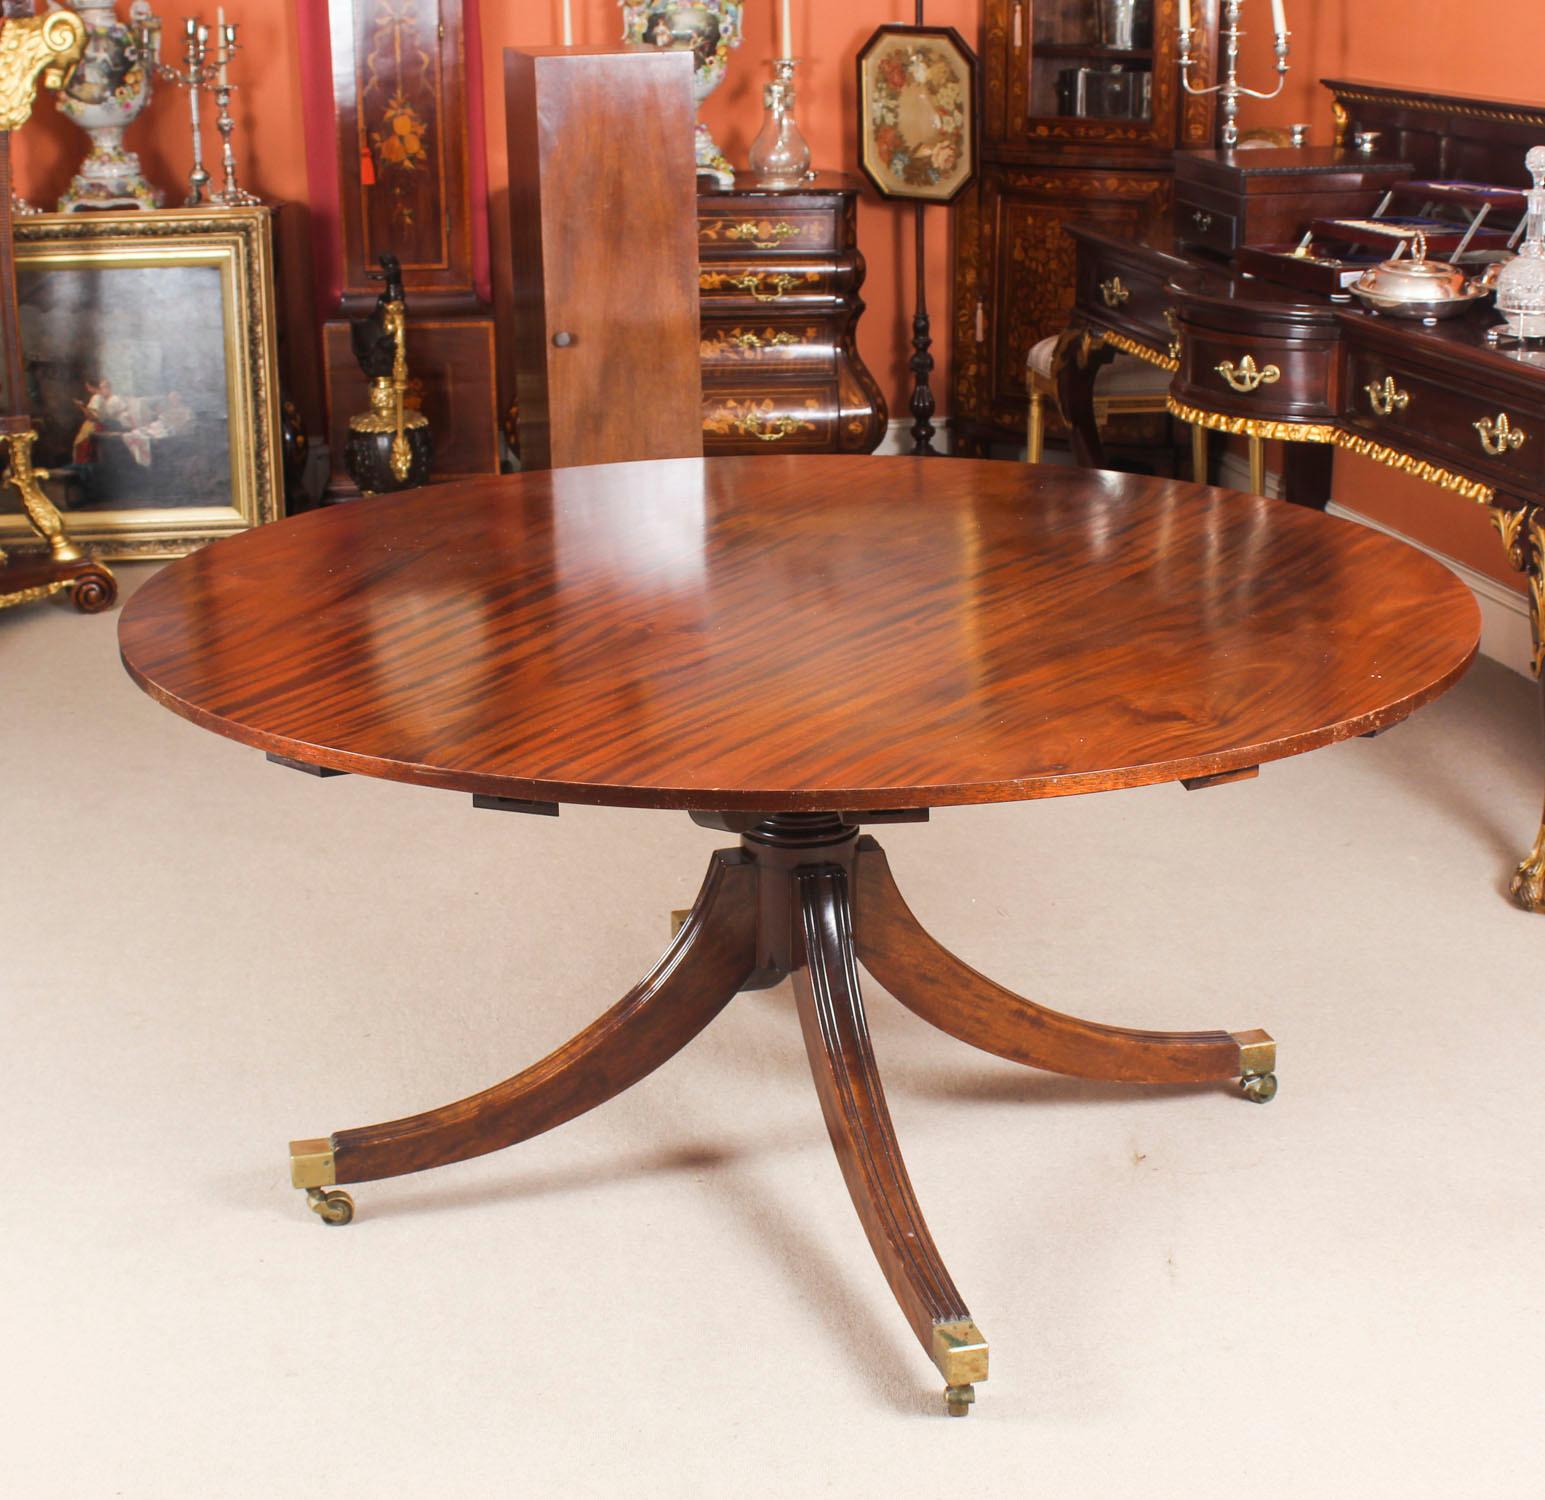 This is a beautiful Regency Revival Jupe style flame mahogany dining table, dating from the mid 20th Century.

The table has a solid mahogany top with a reeded edge that has five additional outer extension leaves that can be added around the